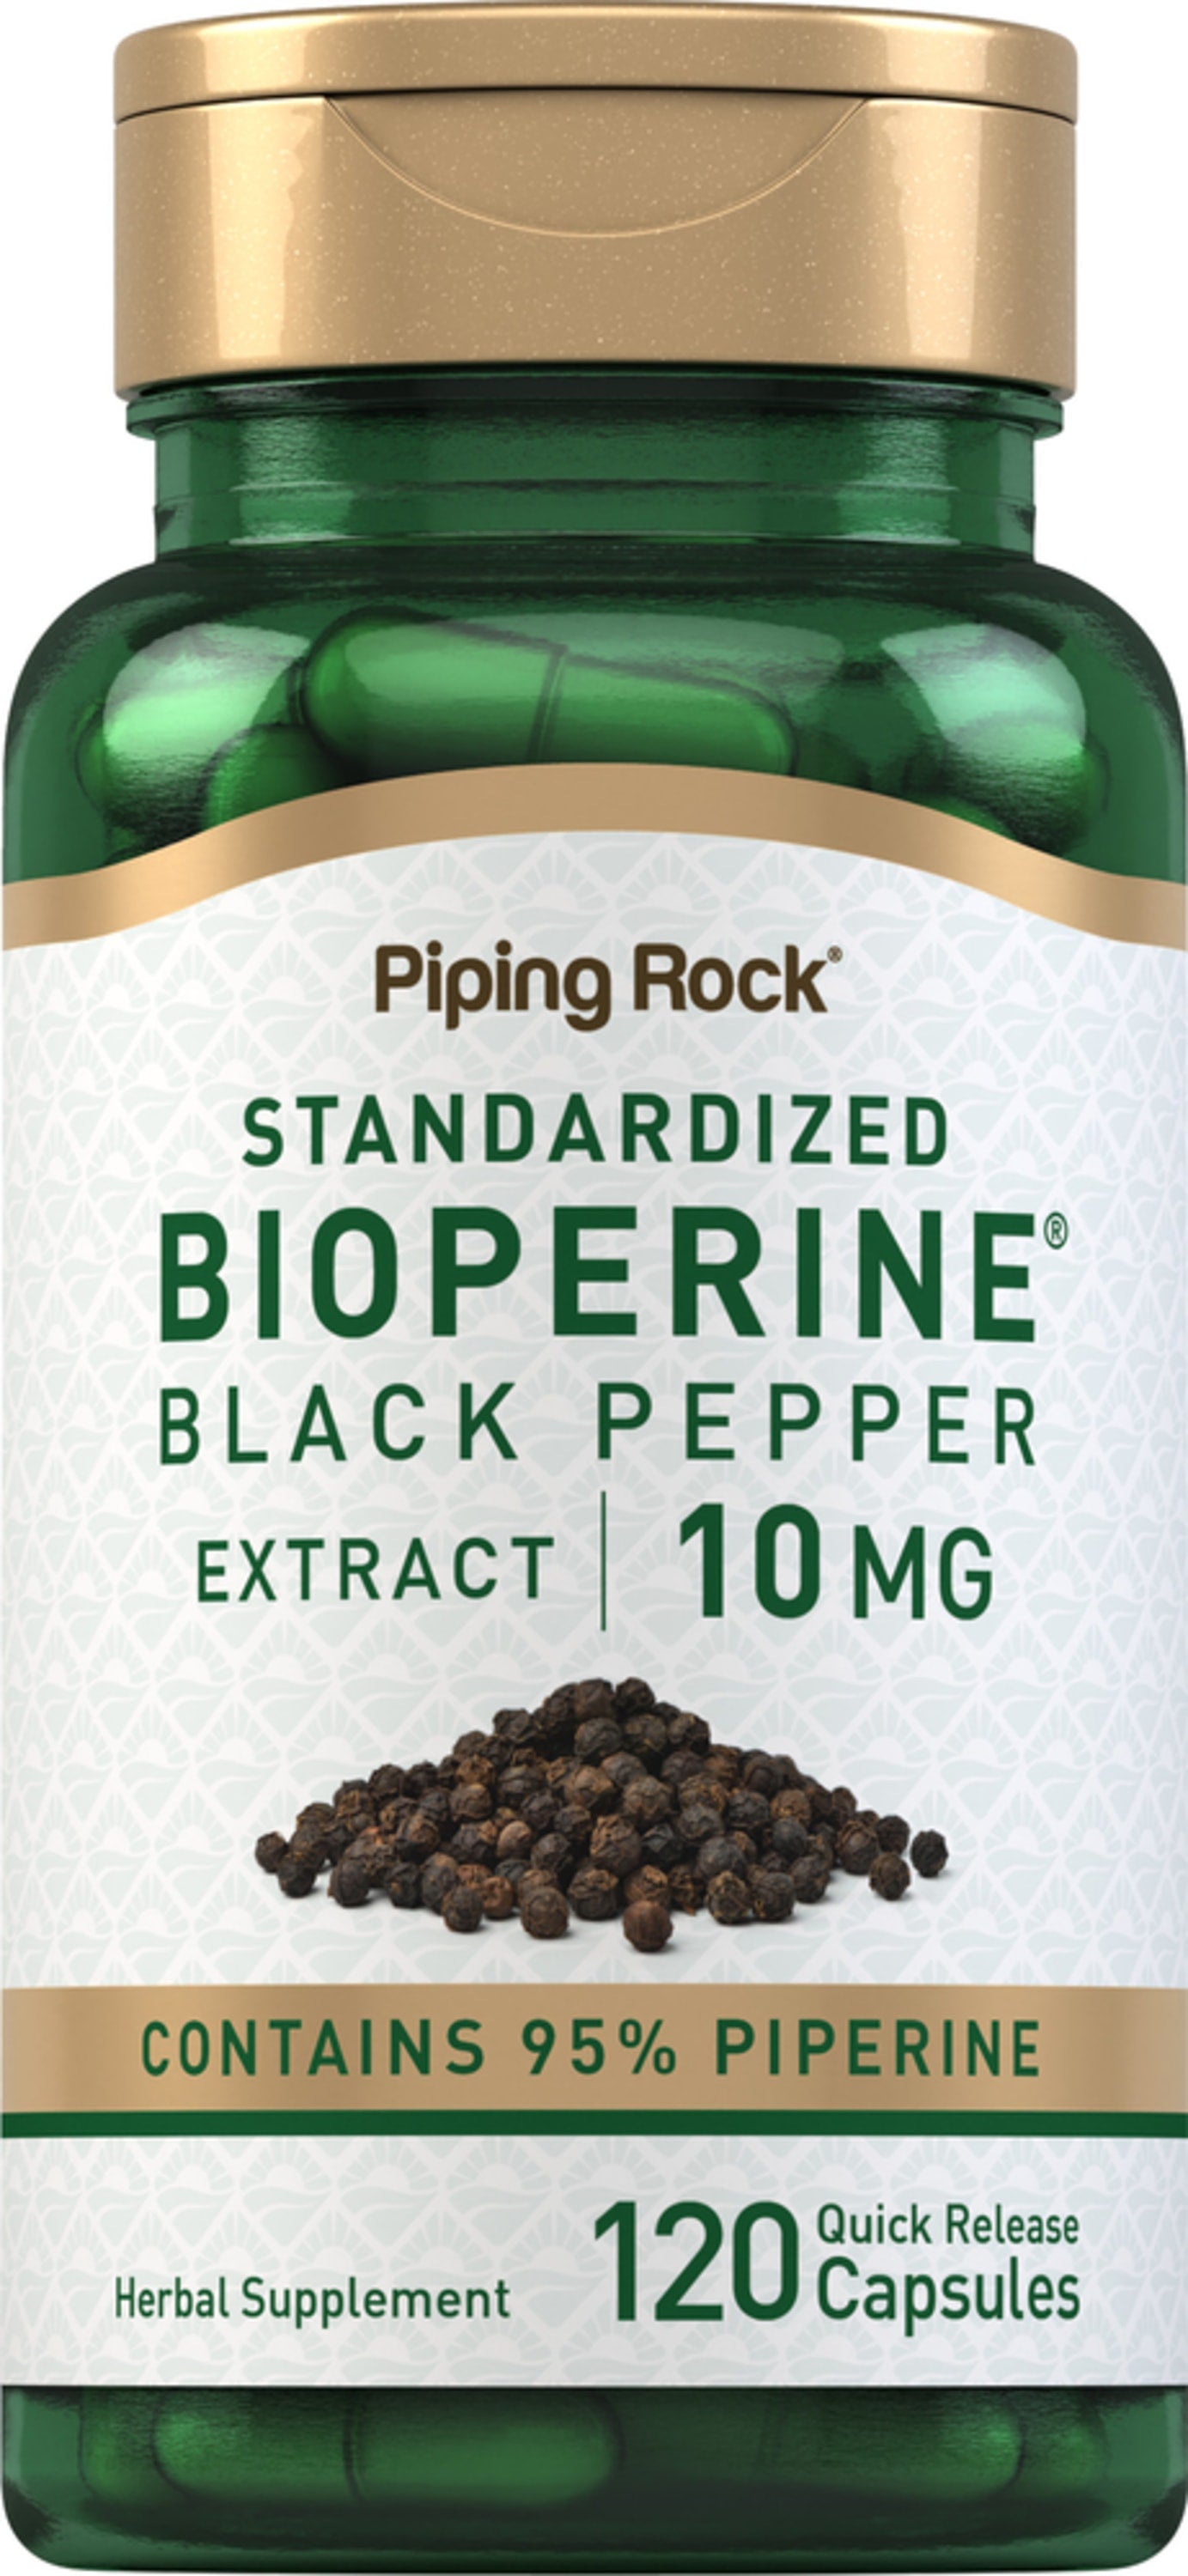 Black pepper extract for immune support